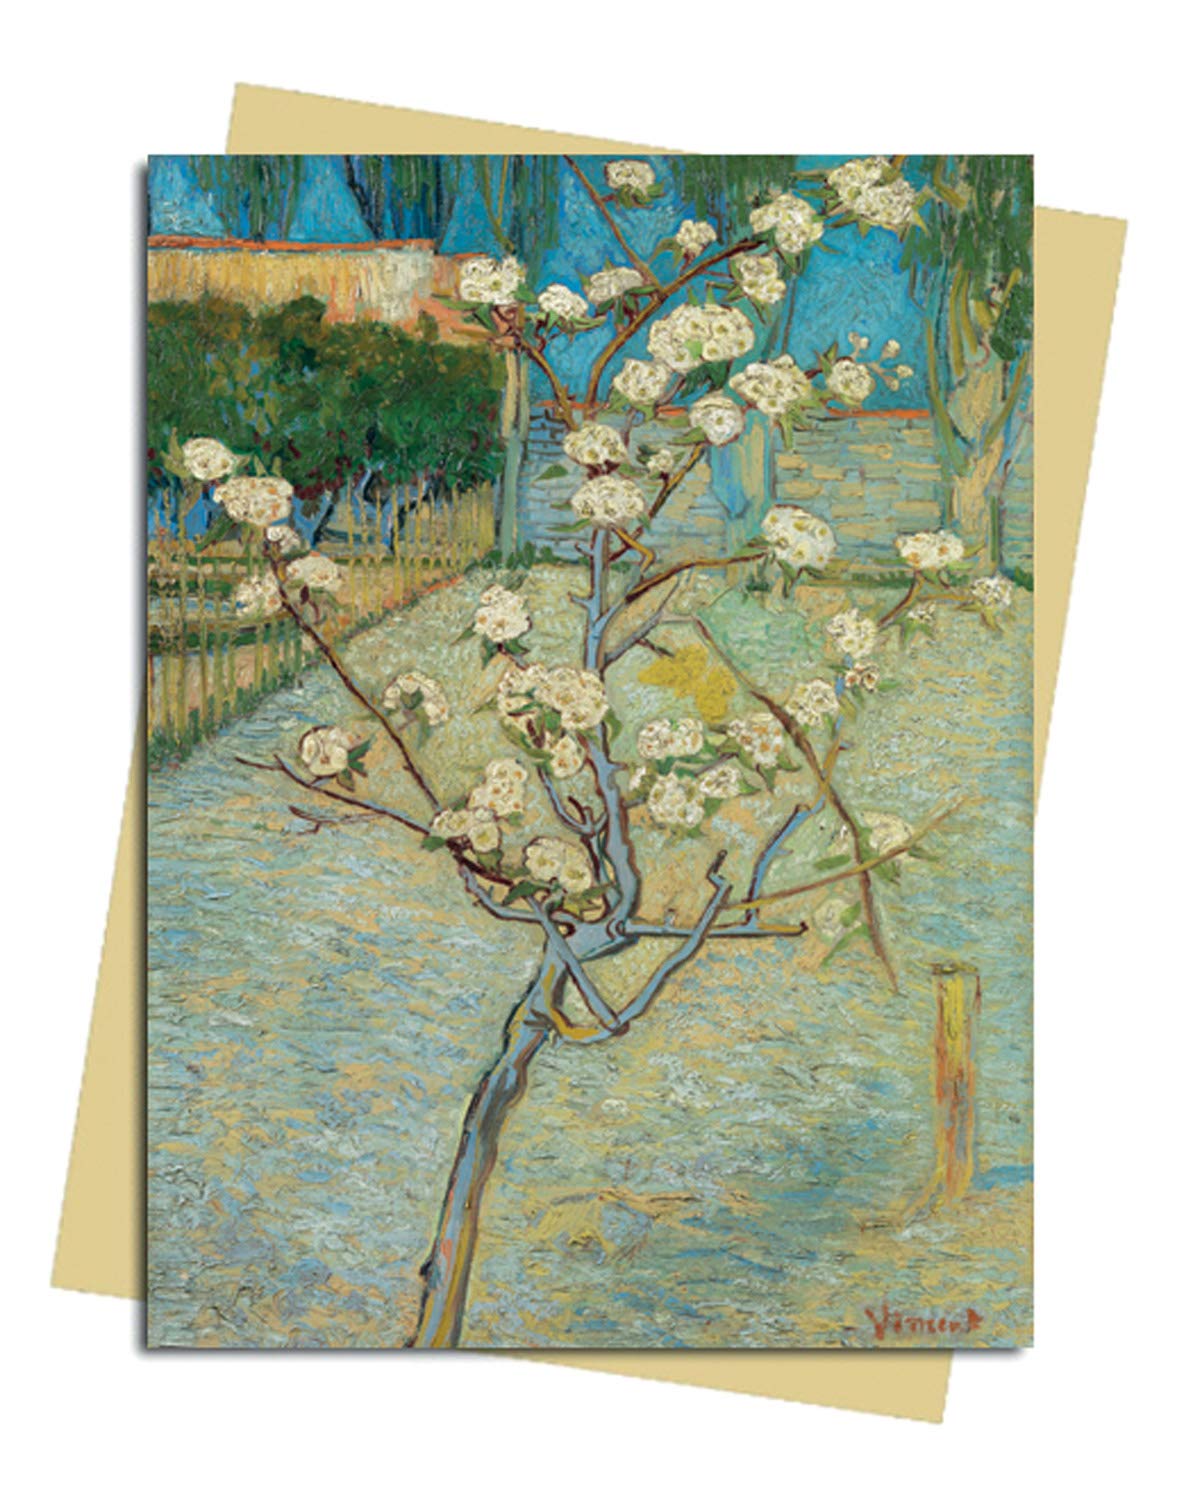 Felicitare - Van Gogh: Small Pear Tree in Blossom | Flame Tree Publishing